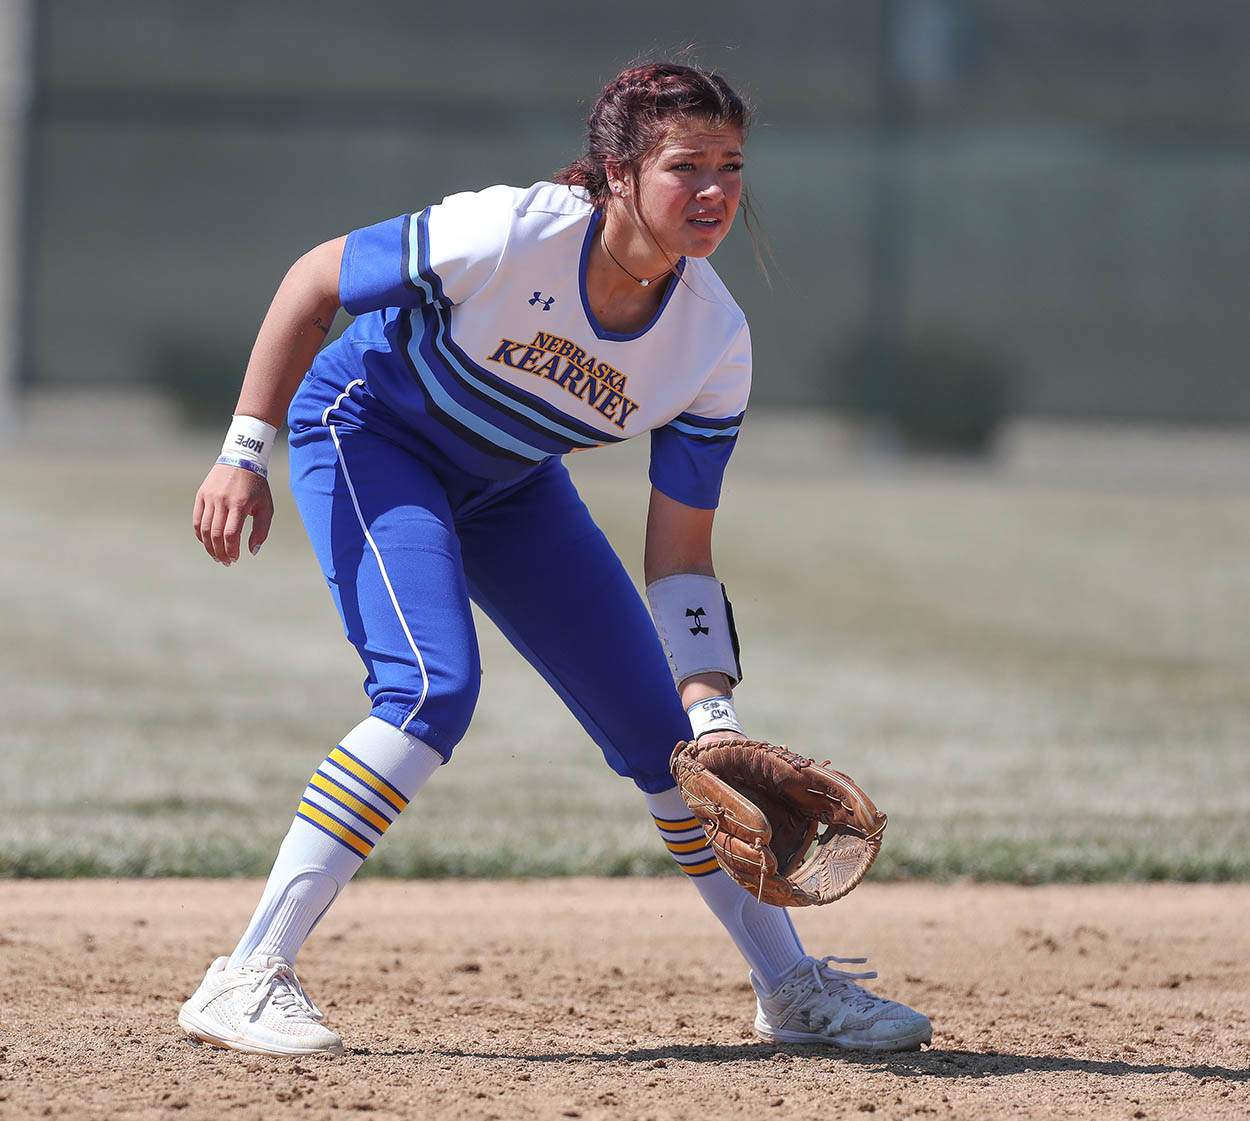 Kearney High School graduate Kaitie Johnson calls her decision to attend UNK and play softball for the Lopers a “no-brainer.” “I’ve always loved playing for Kearney,” the 21-year-old said. “It’s a different type of atmosphere when you’re from here, everyone knows you and they want you to succeed.”